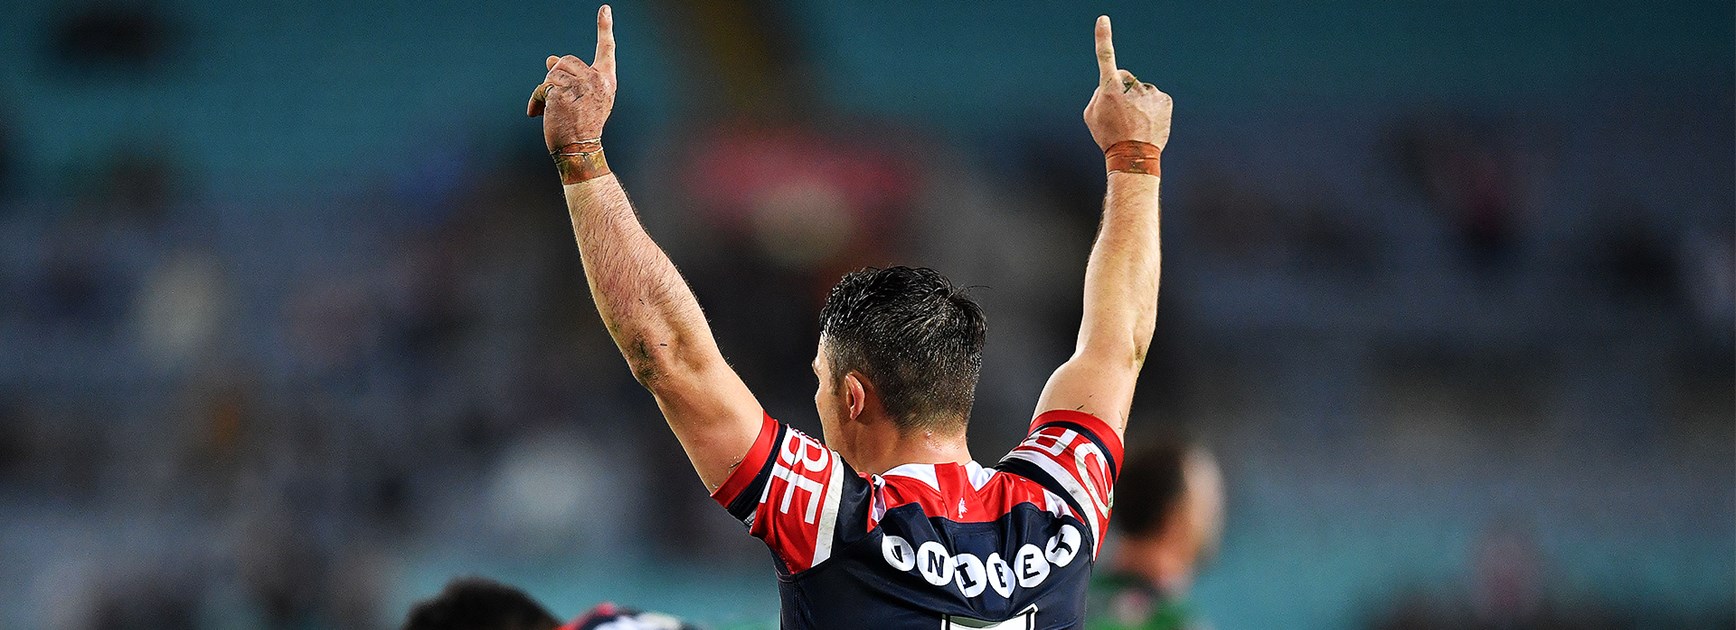 Cronk cranks it up as Roosters leapfrog Rabbitohs into top spot